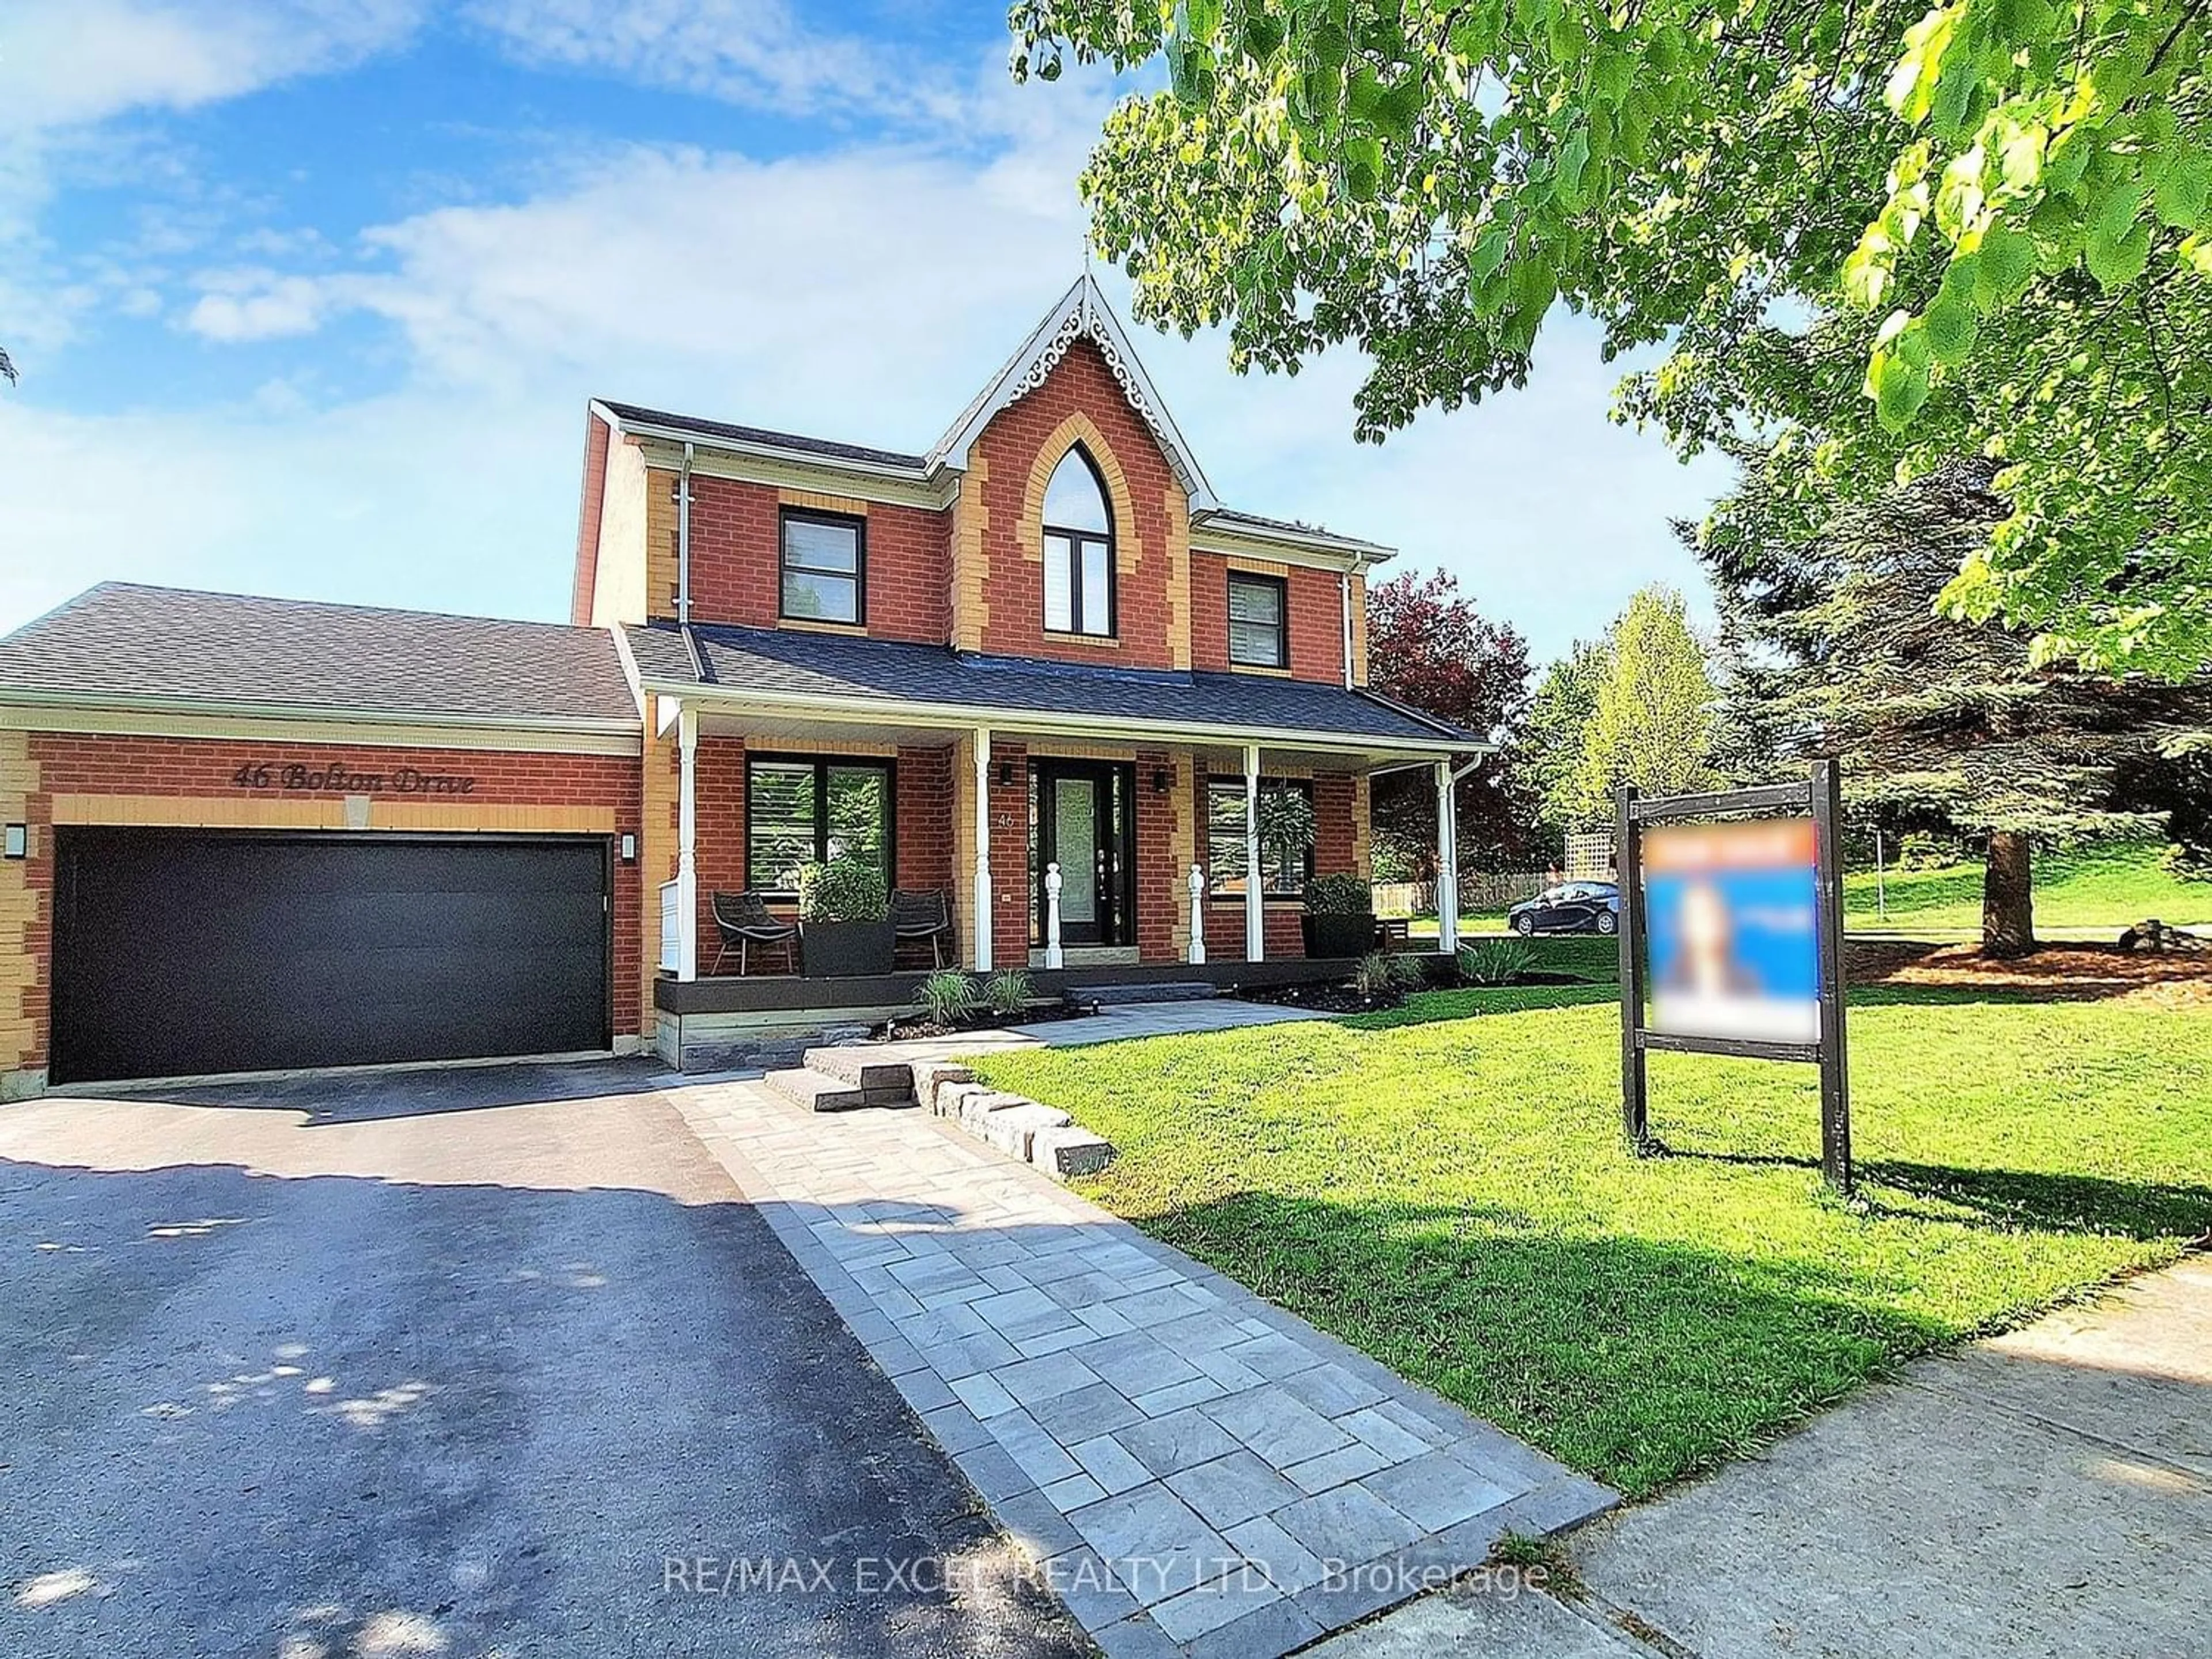 Home with brick exterior material for 46 Bolton Dr, Uxbridge Ontario L9P 1W5